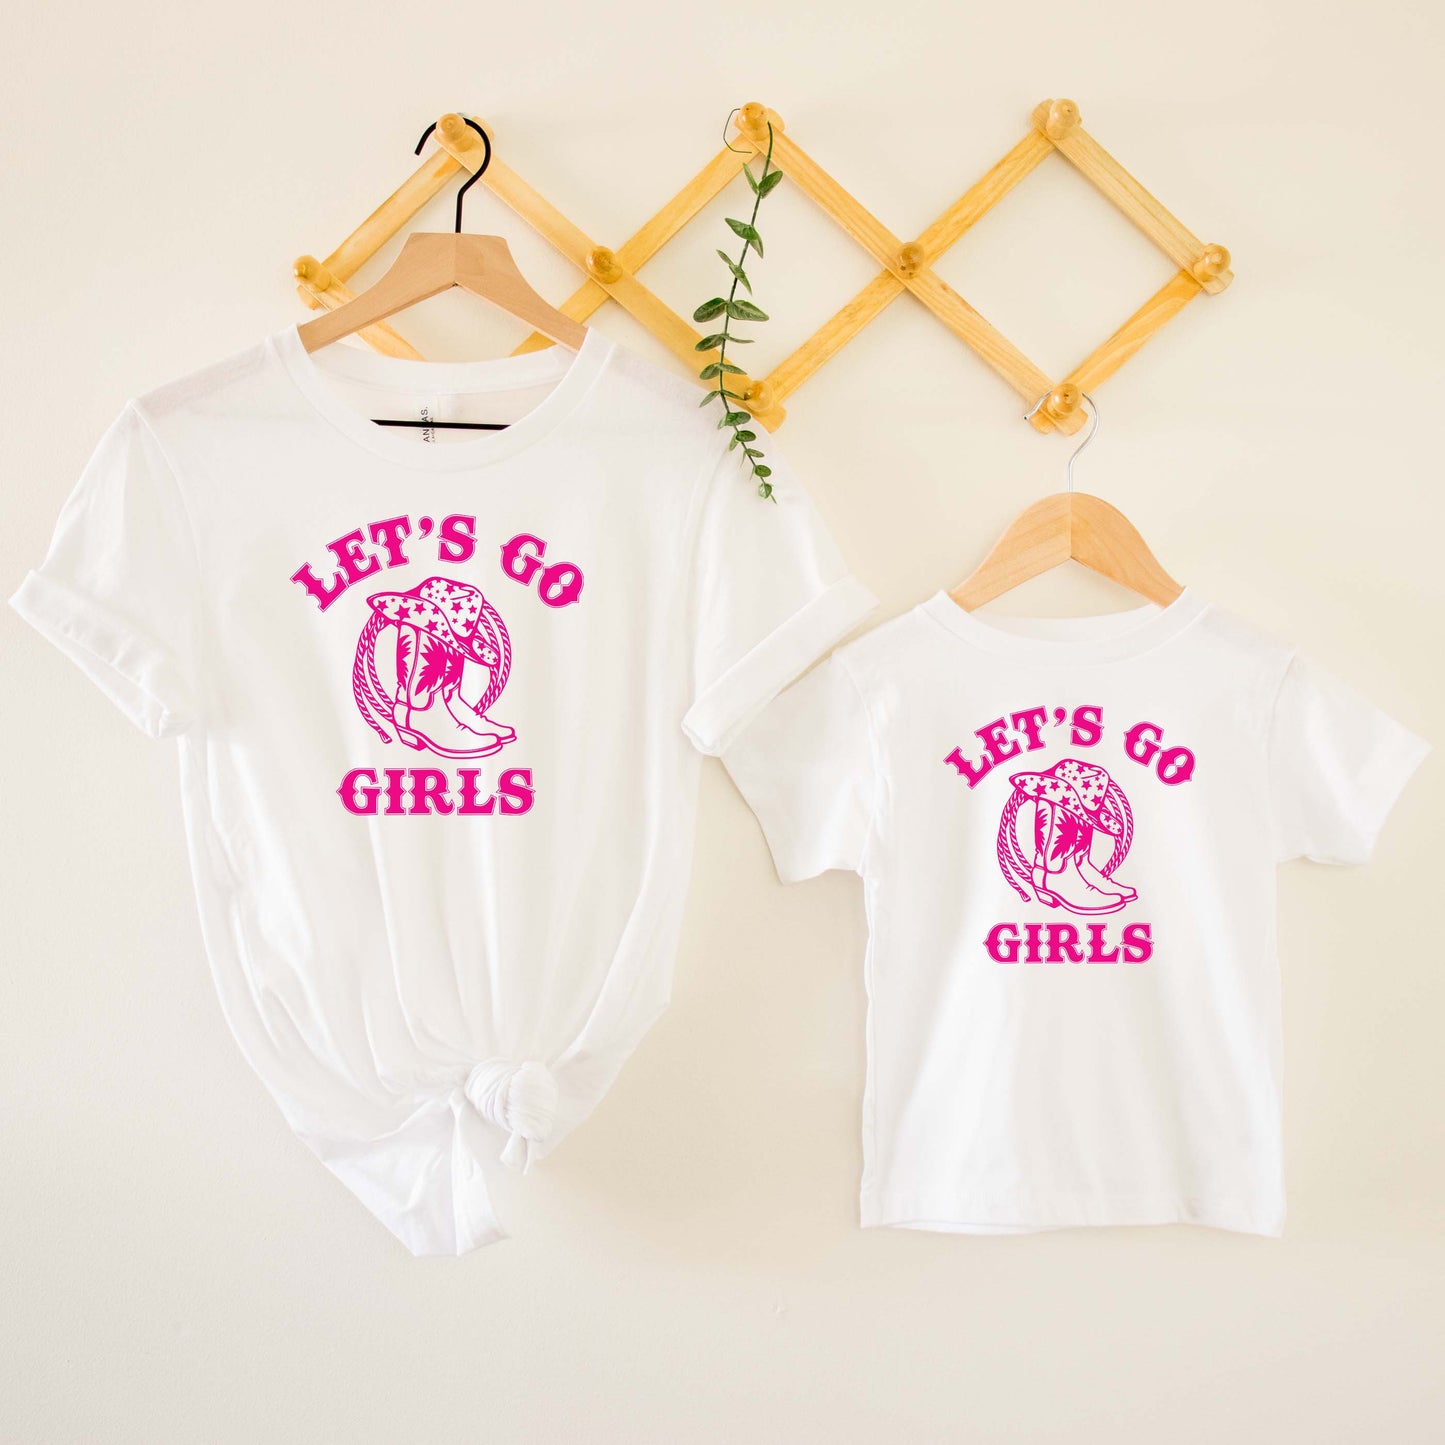 Lets Go Girls Youth Tee Bundle